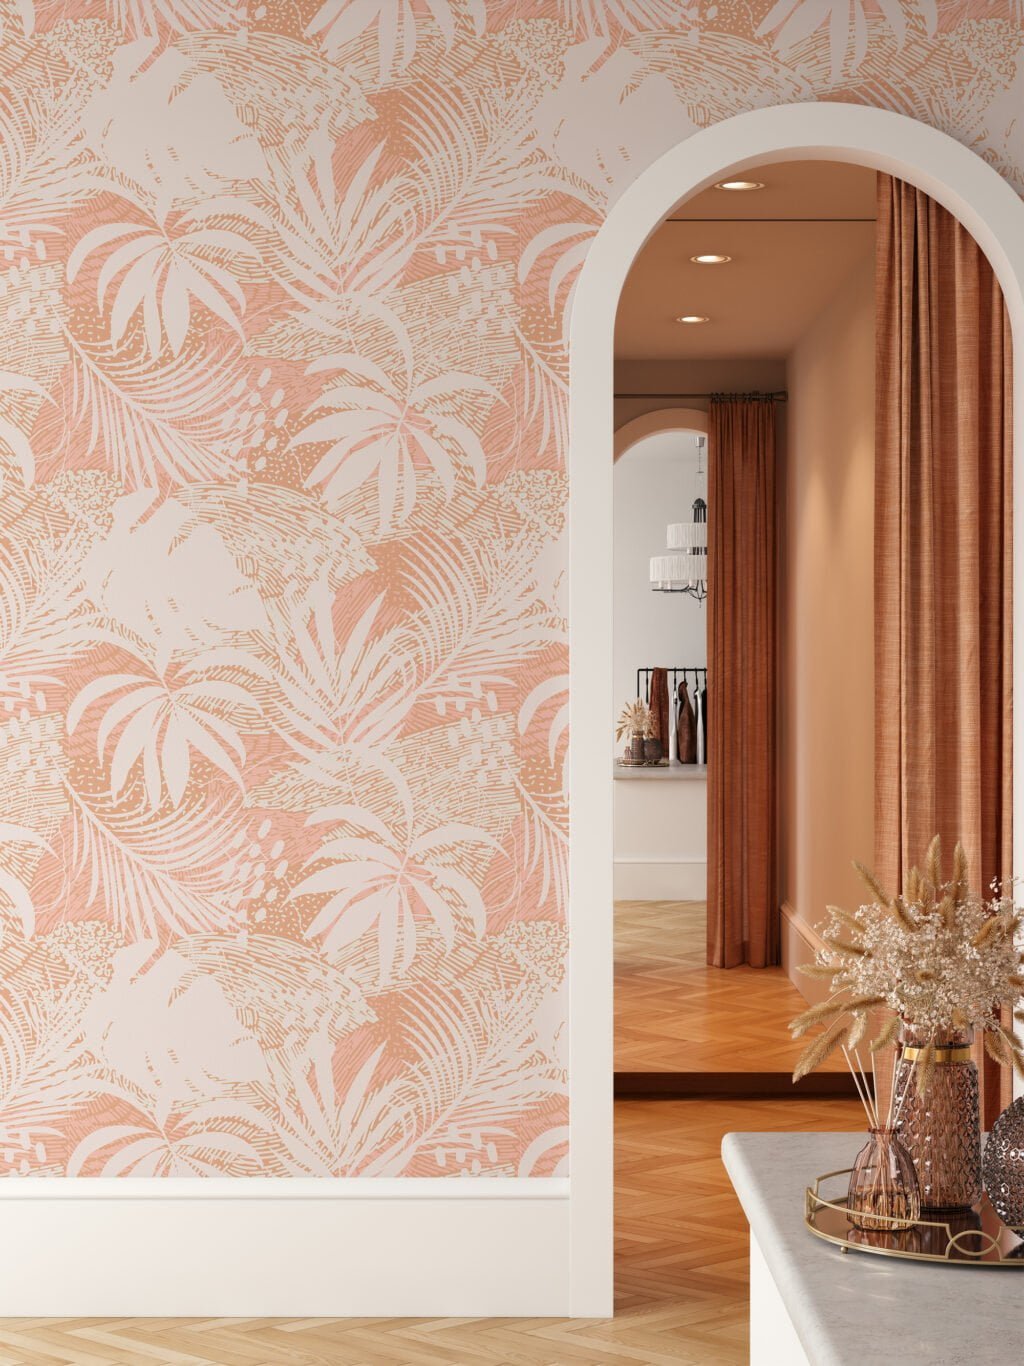 Peach Large Tropical Palm Leaf Silhouette Illustration Wallpaper, Modern Chic Peel & Stick Wall Mural